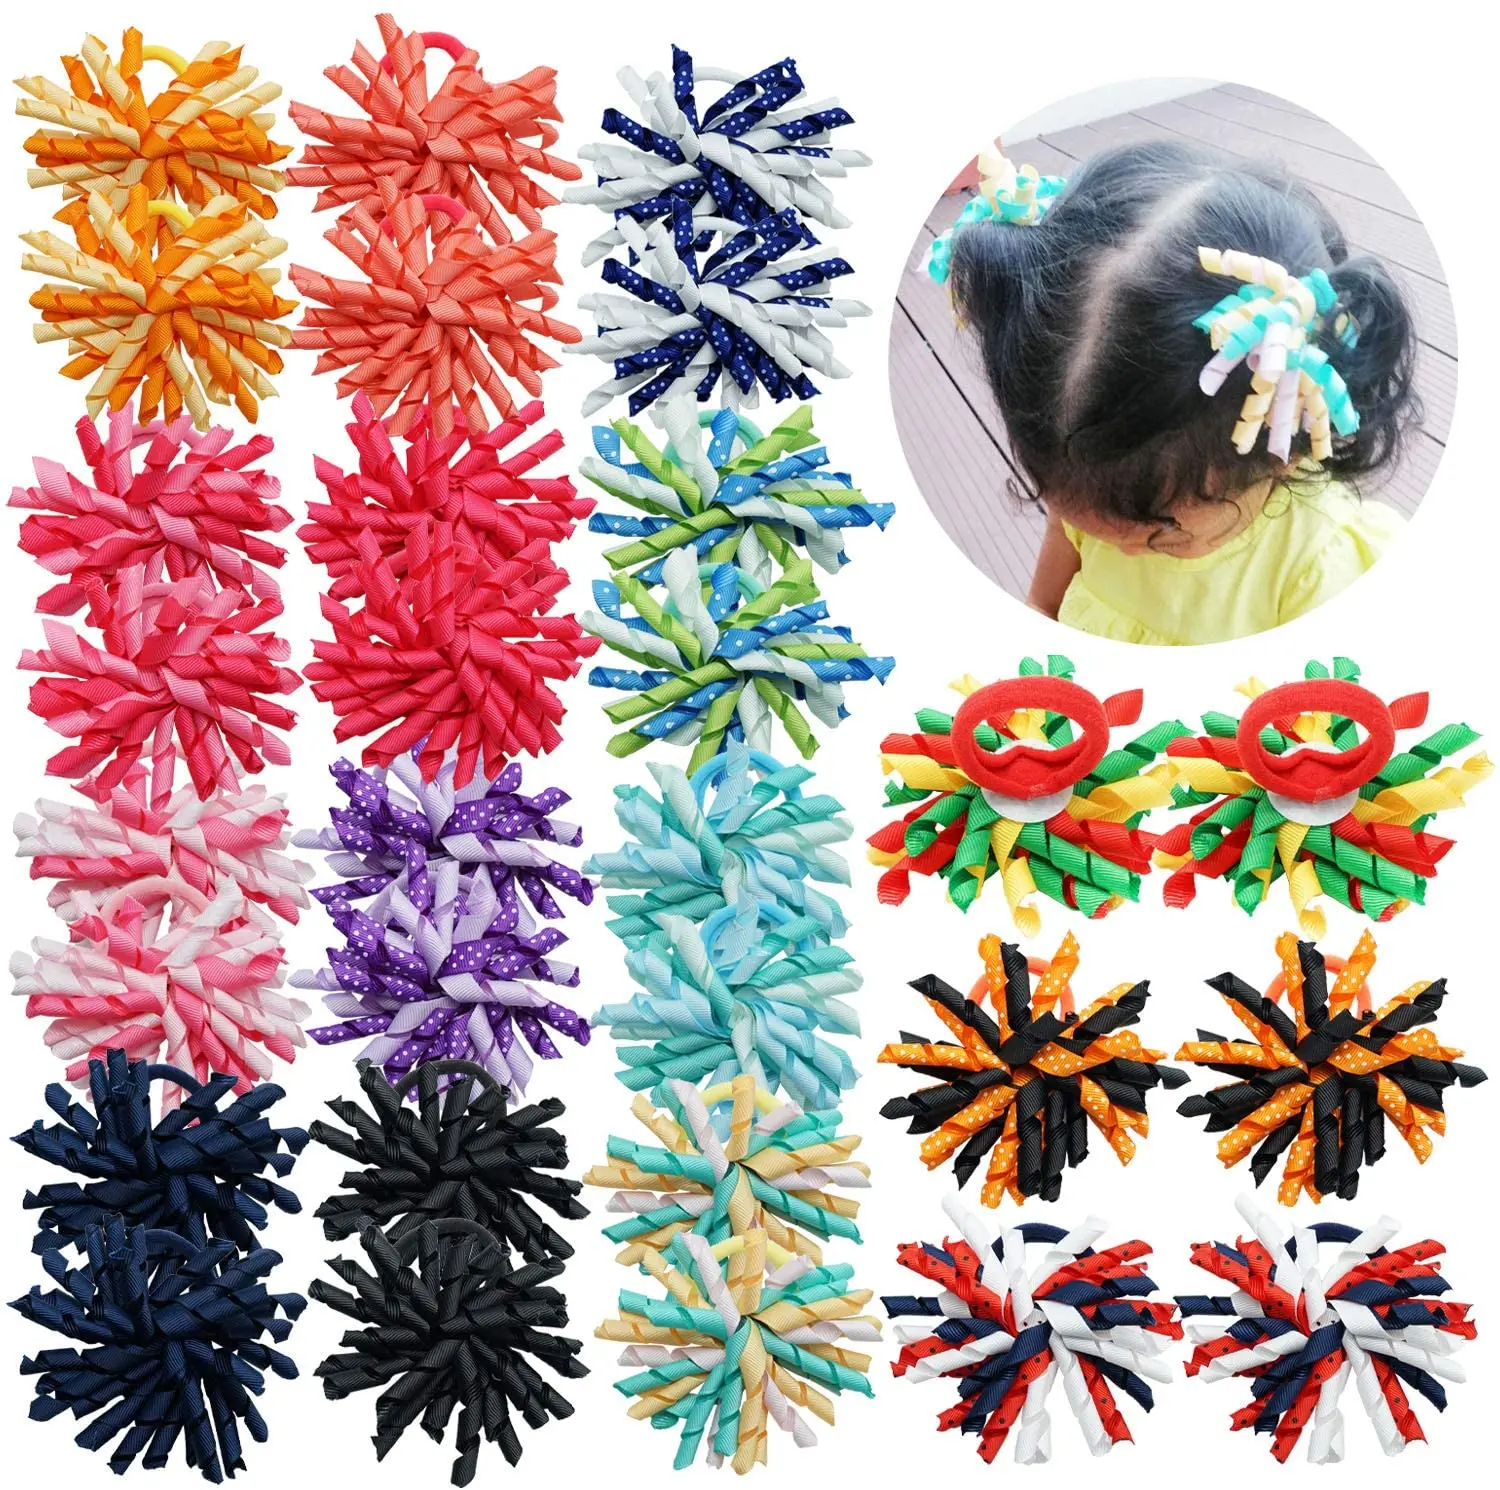 30Pcs Hair Ties Rubber Bands Colorful Curly Ribbon Elastic Seamless Hair Bows Bands for Girls Toddlers Kids Accessories Gifts 30pcs tz f0624l 1 1